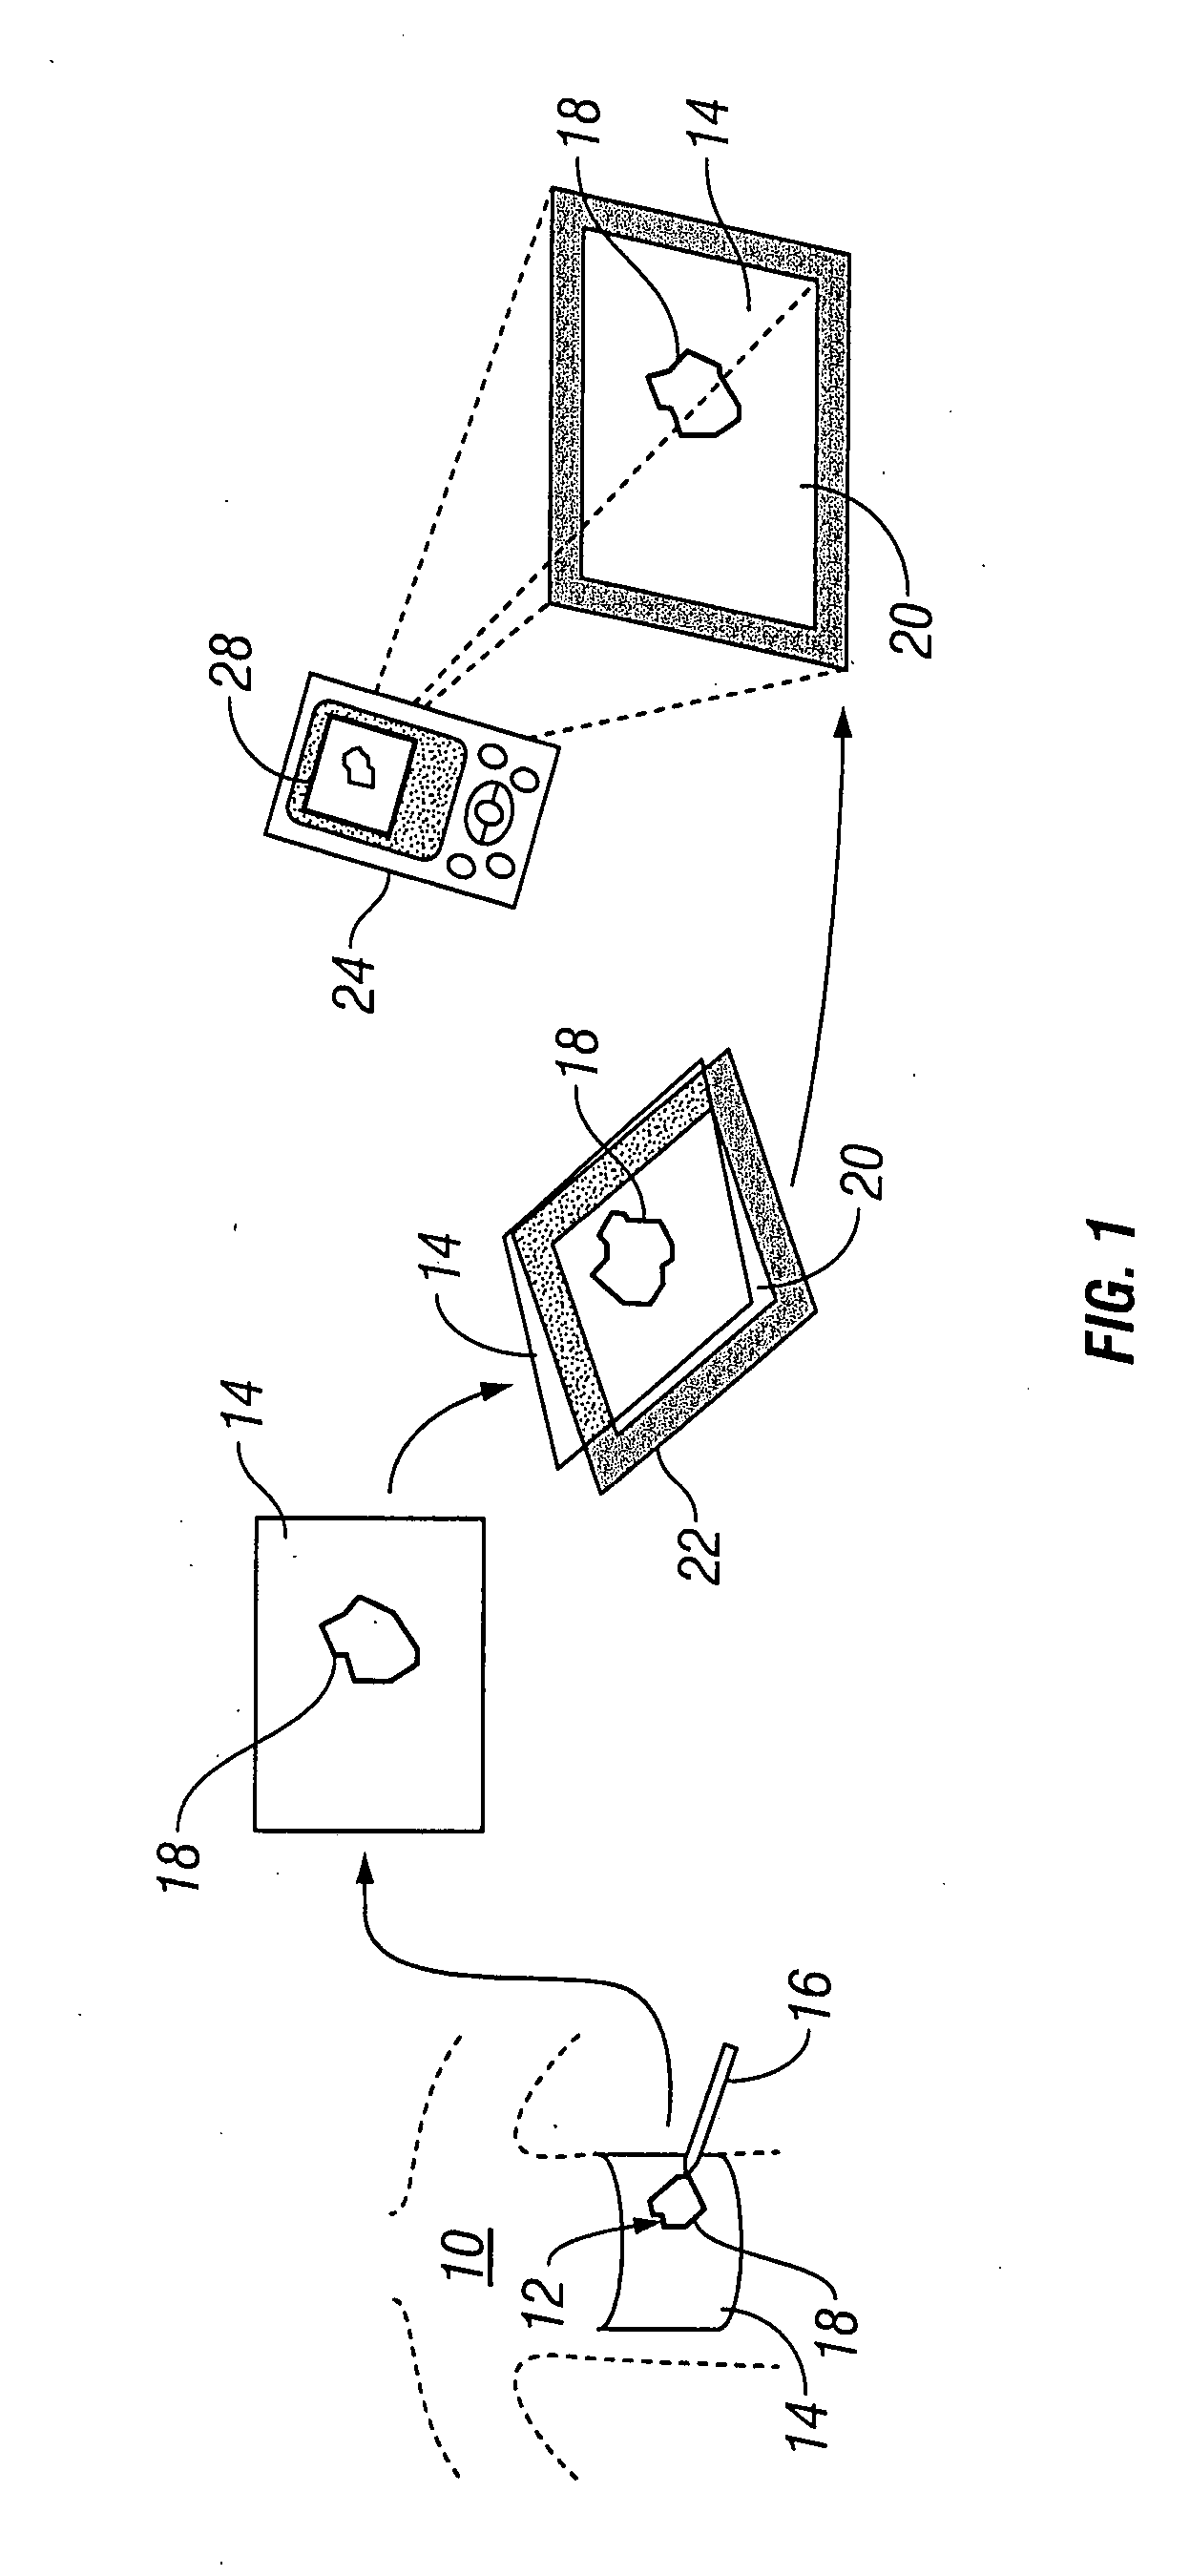 Systems and methods for wound area management